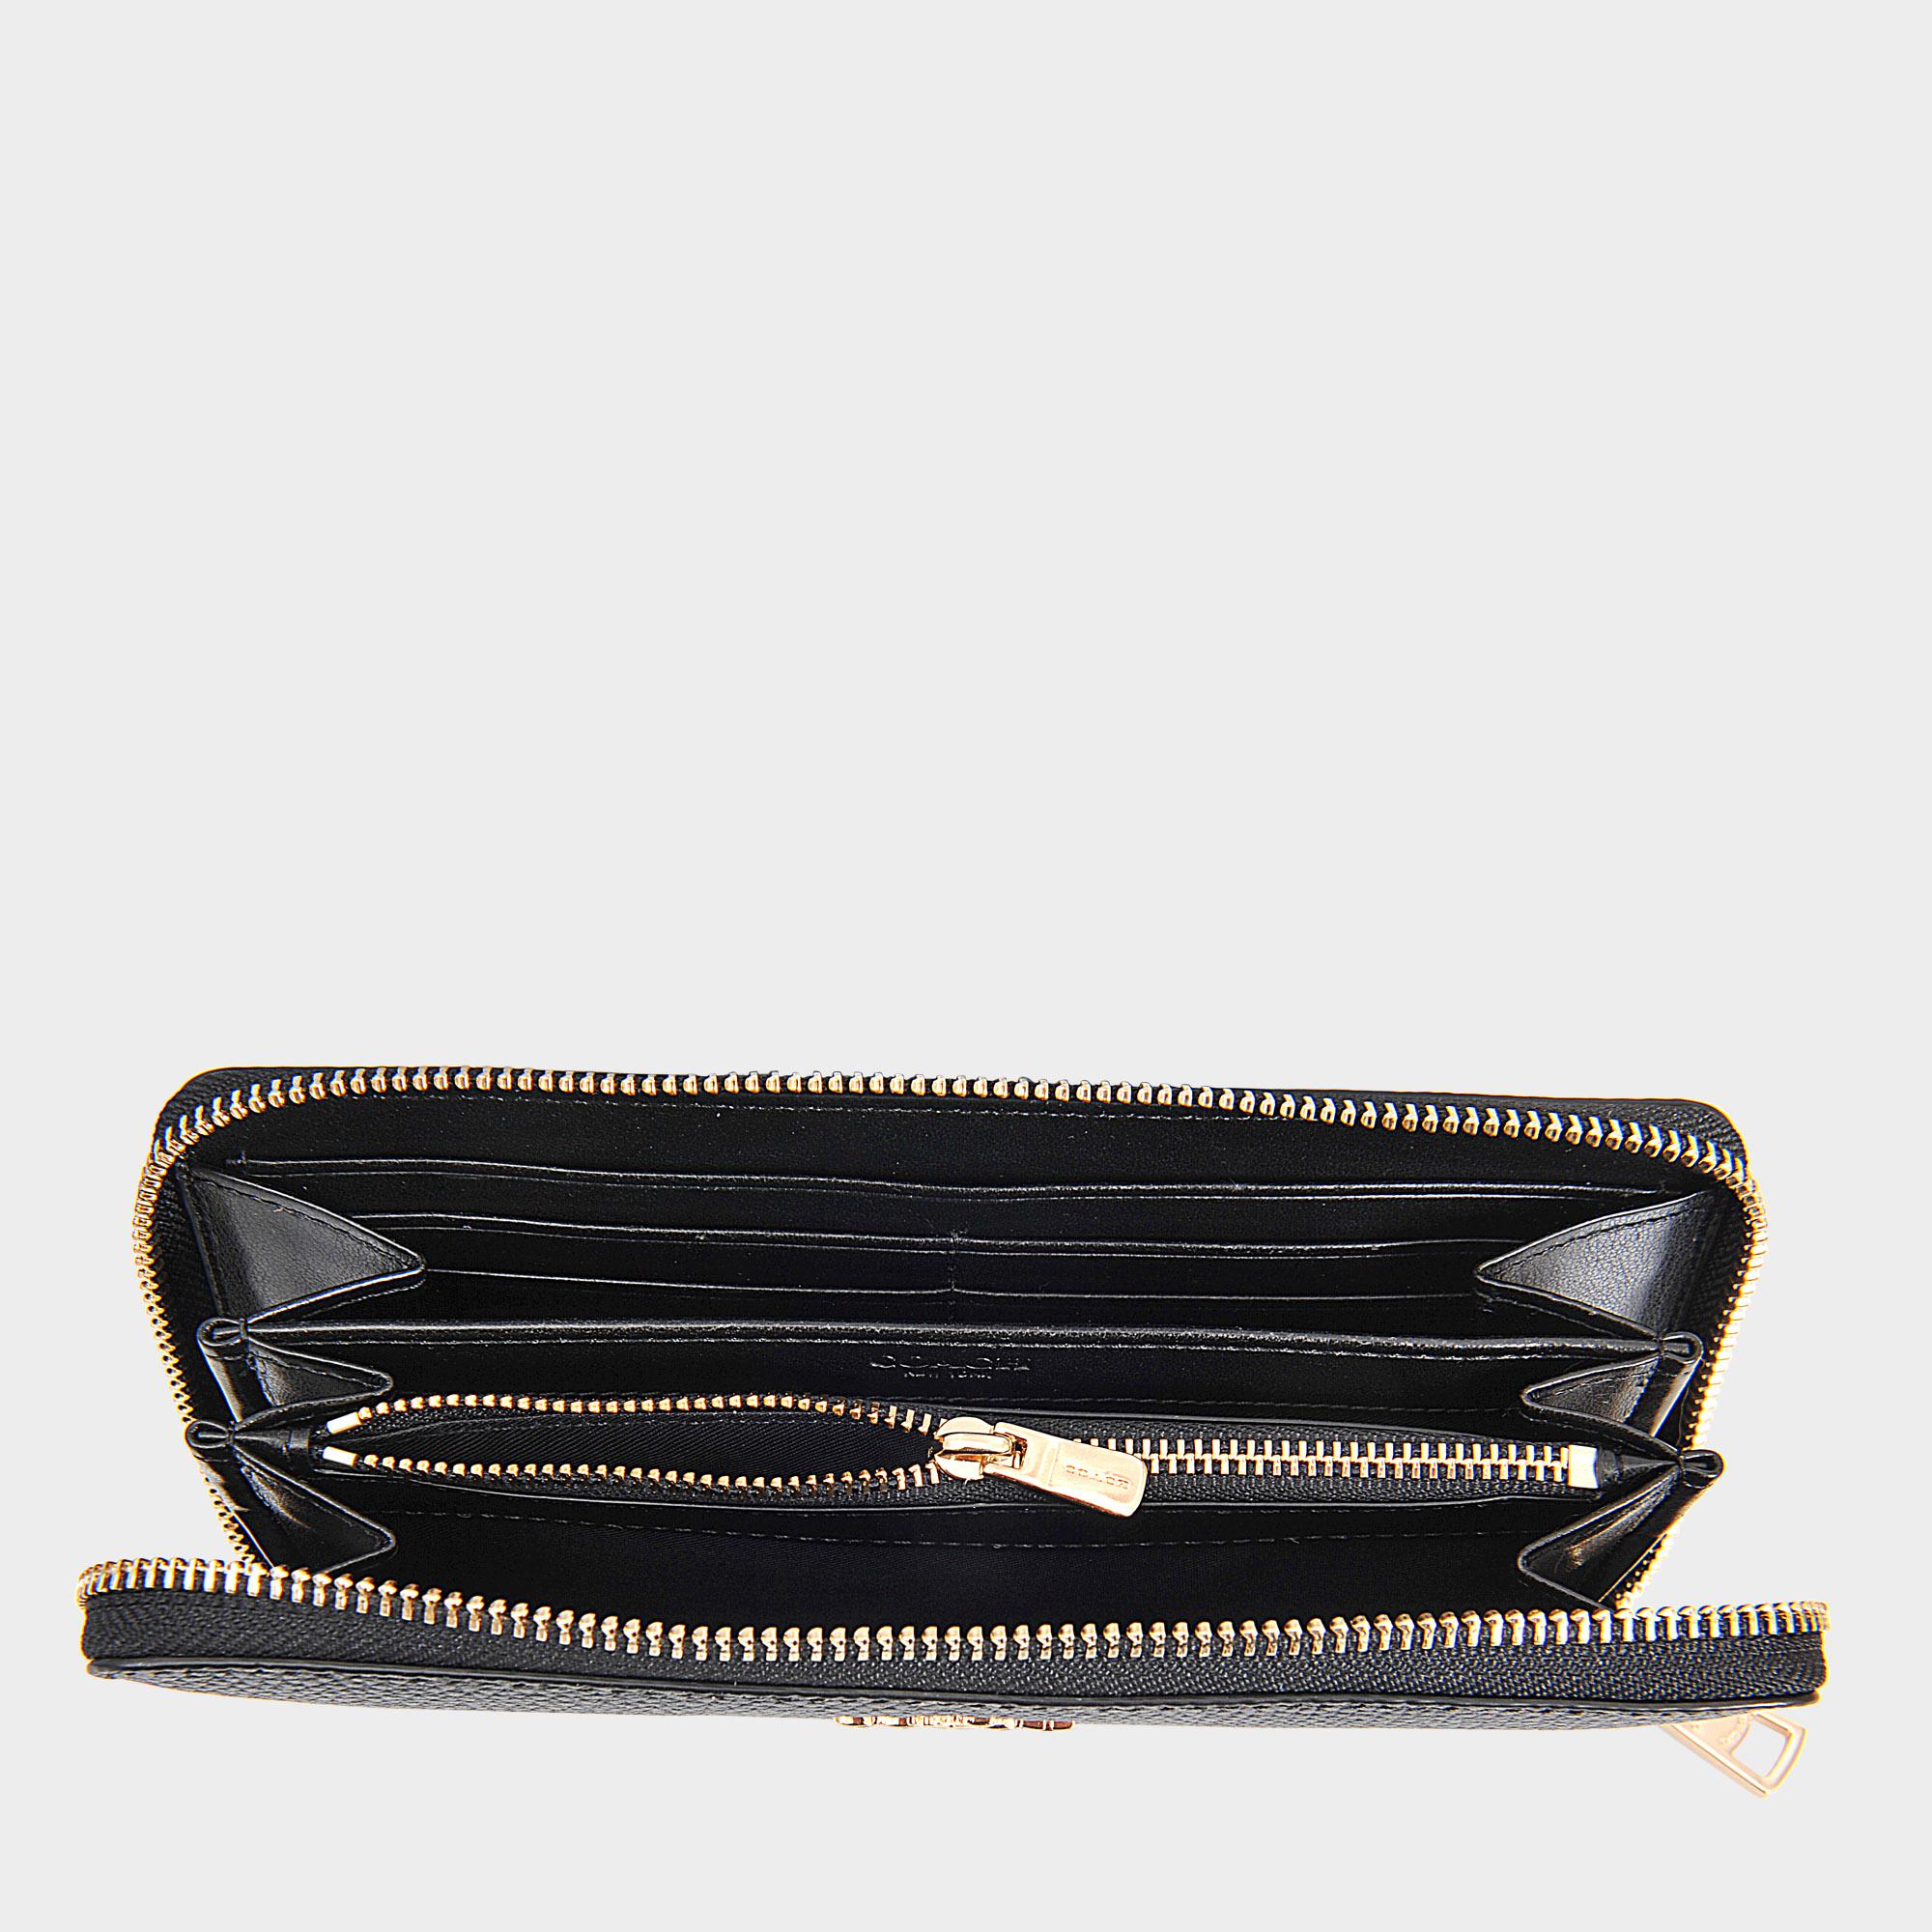 COACH Leather Accordion Zip Wallet in Light Gold/Navy (Black) - Lyst